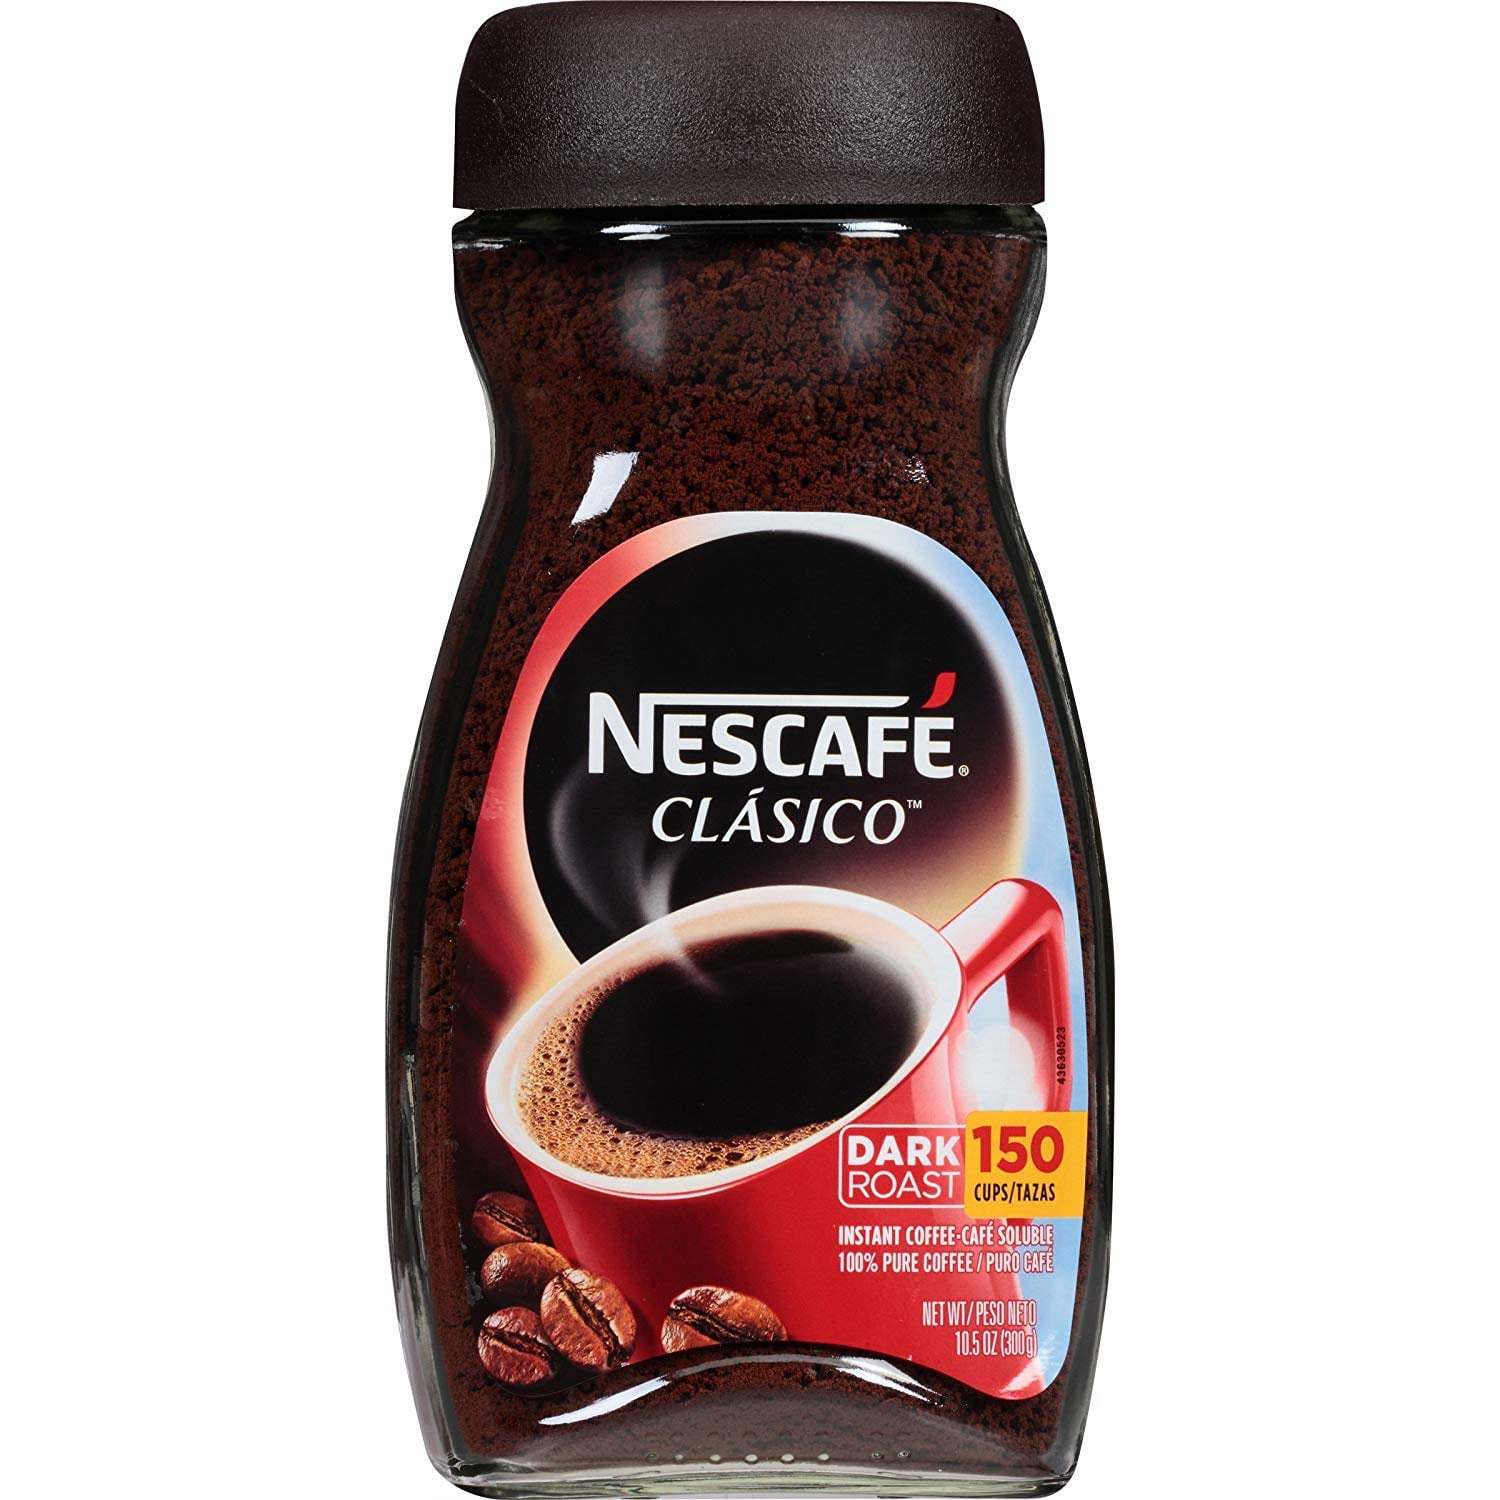 Nescafe 3 in 1 strong - 10 PACK – island MishMash